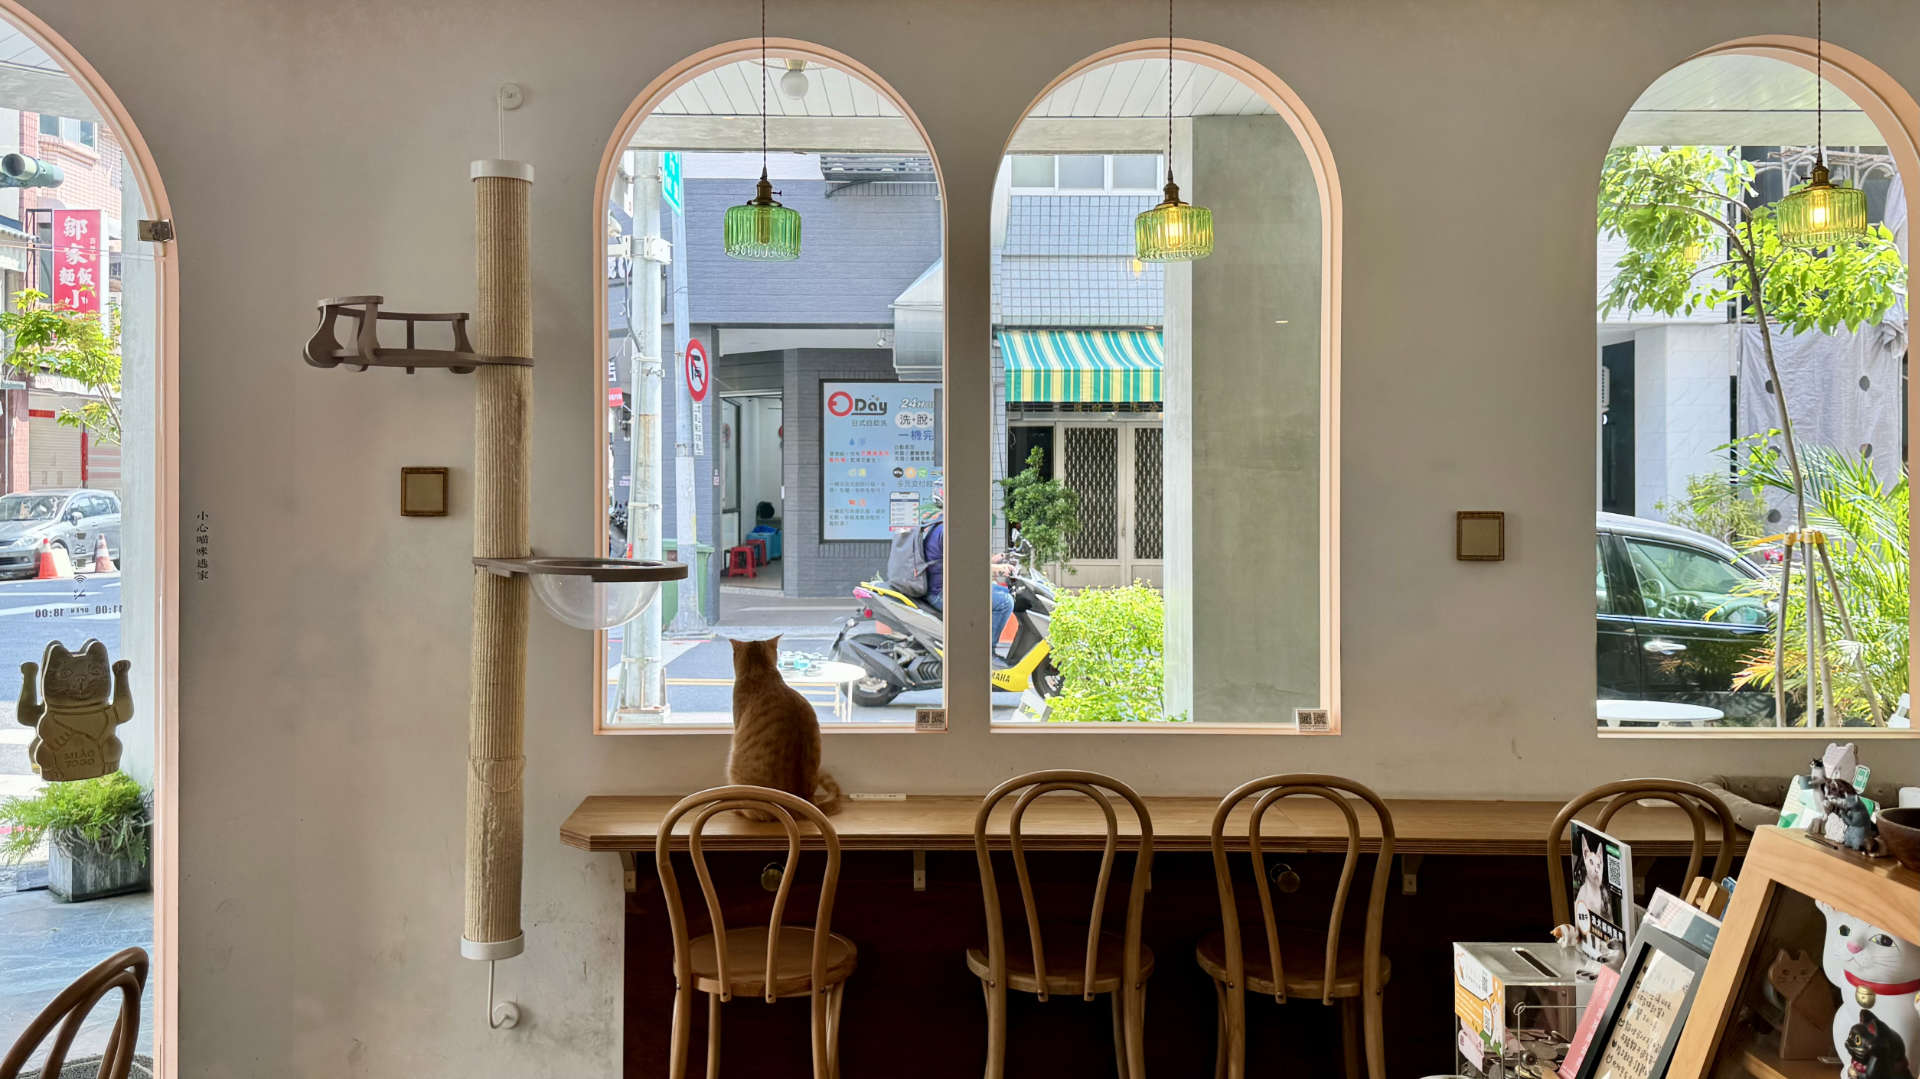 Wide-angle view of the cafe interior. On the opposite side of the room, a cat is sitting at a window, looking outside. There is cat-themed merchandise in the cabinet on the right.